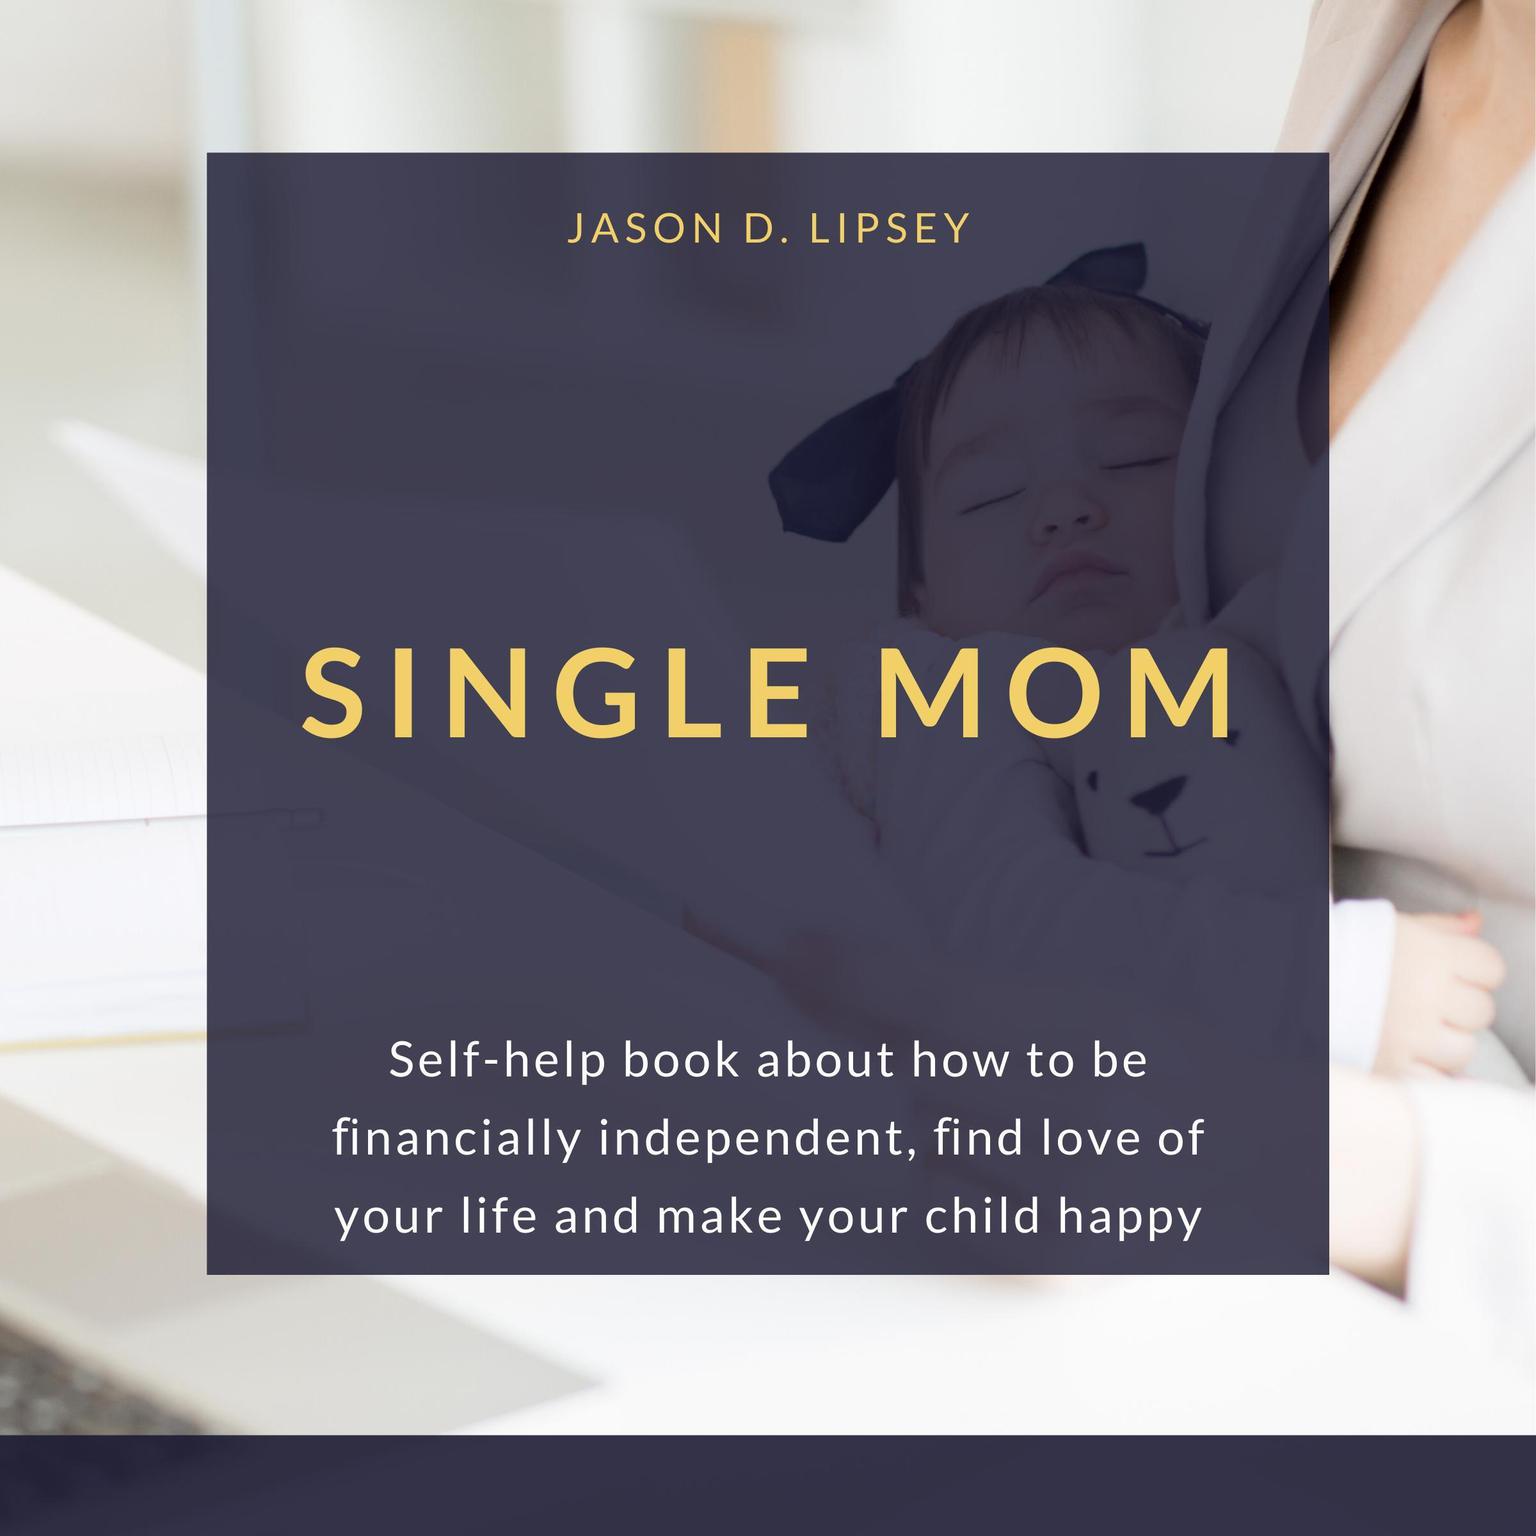 SINGLE MOM Self-help book about how to be ﬁnancially independent, ﬁnd love of your life and make your child happy Audiobook, by Jason D. Lipsey